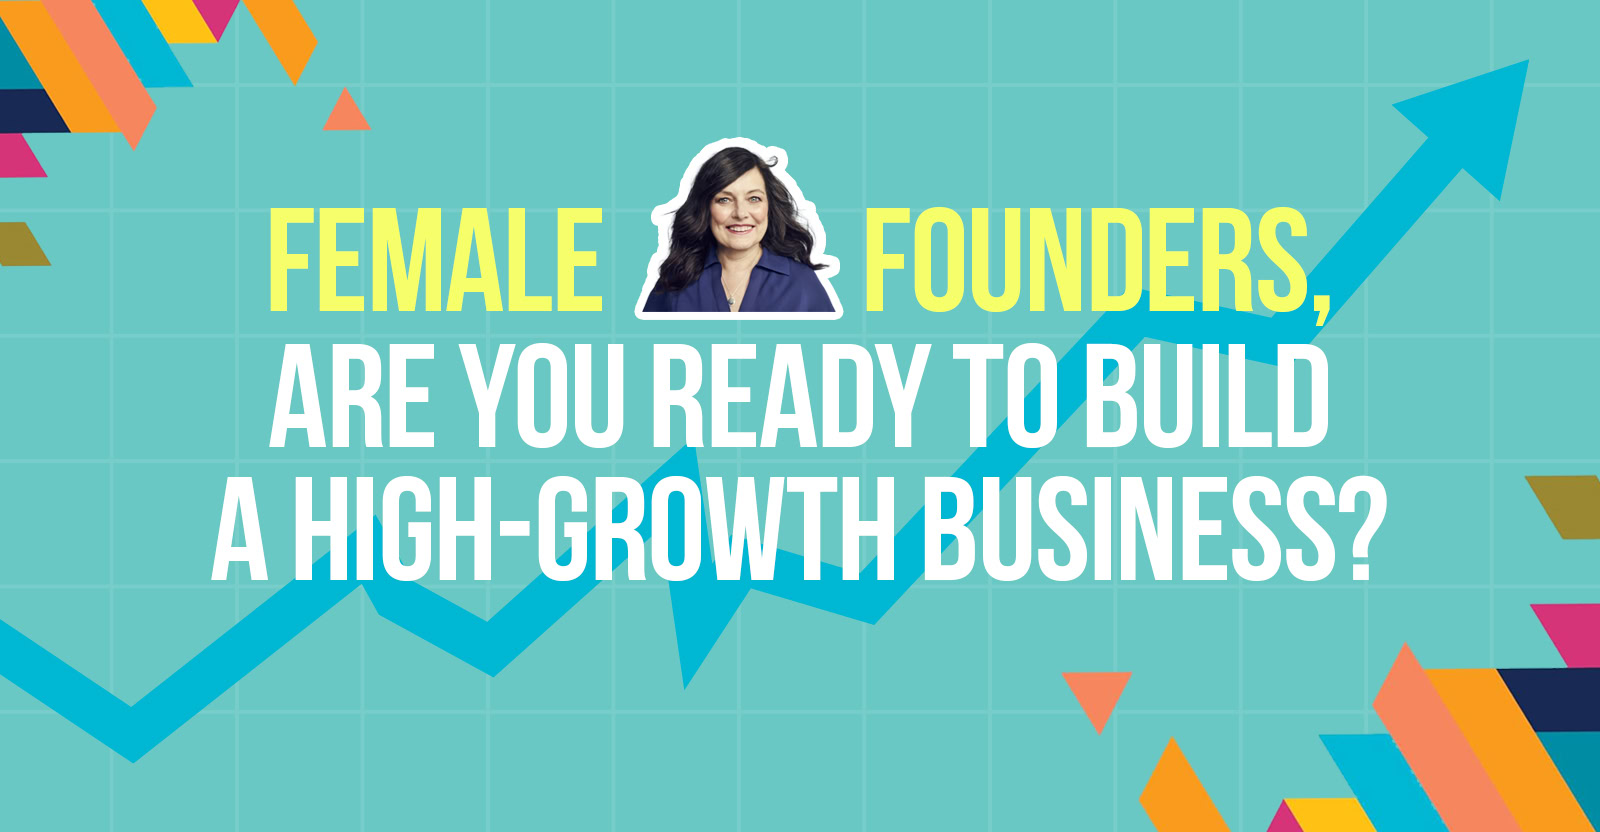 Are You Ready To Build A High-Growth Business?